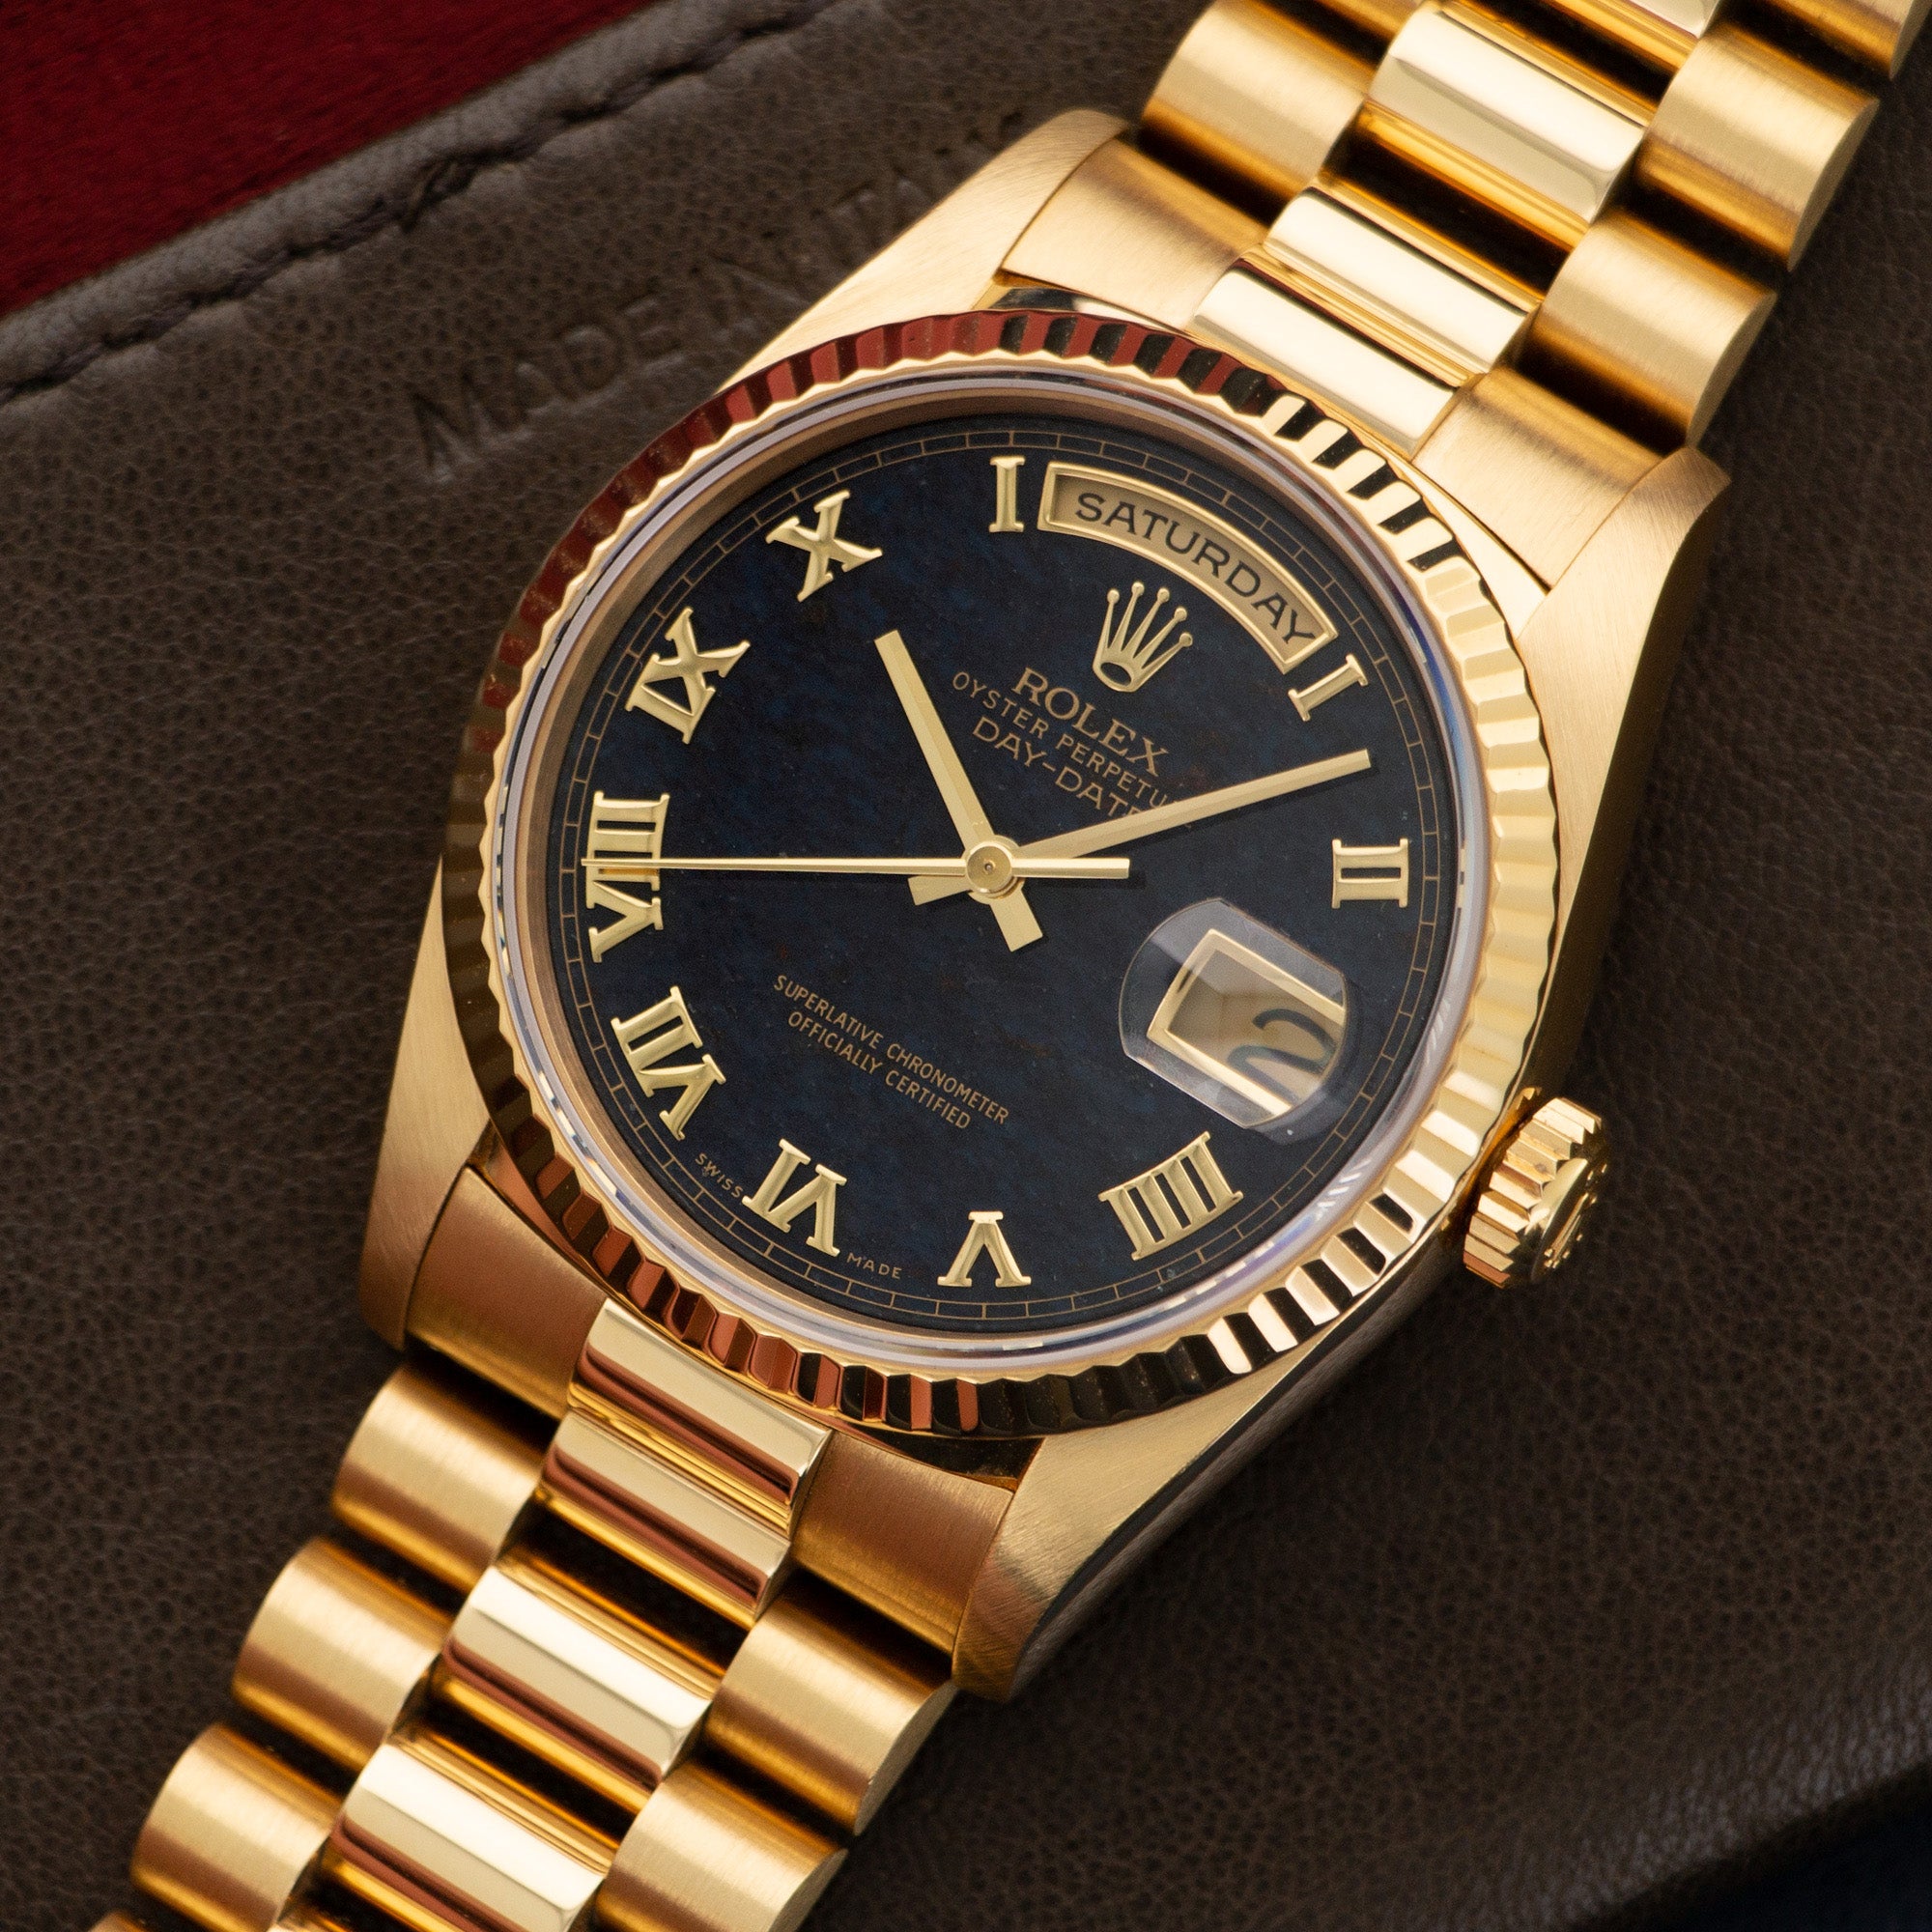 Rolex - Rolex Yellow Gold Day-Date Ferrite Stone Dial Watch Ref. 18238 - The Keystone Watches